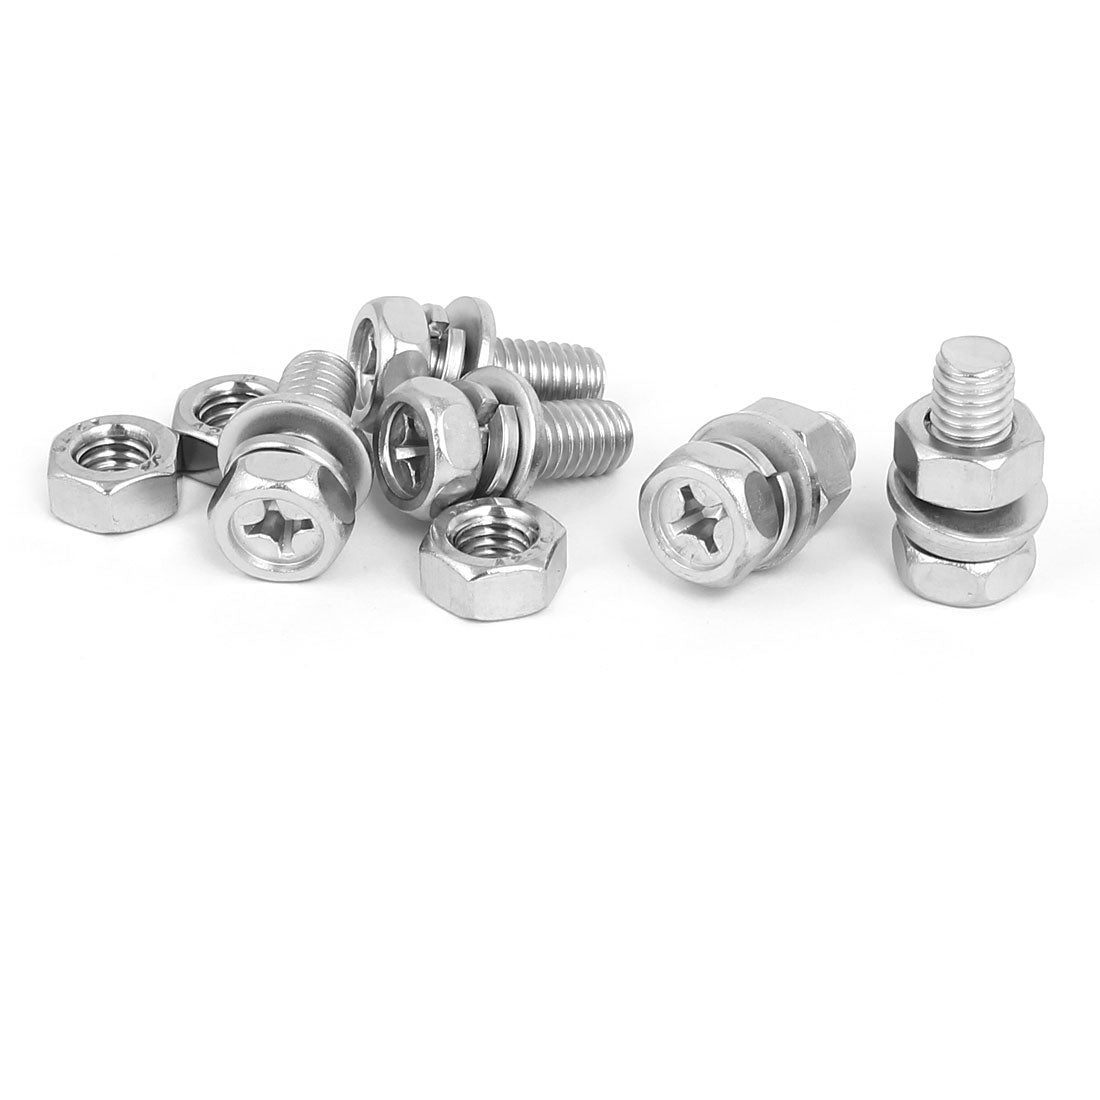 uxcell Uxcell M8 x 20mm 304 Stainless Steel Phillips Hex Head Bolts Nuts w Washers 5 Sets